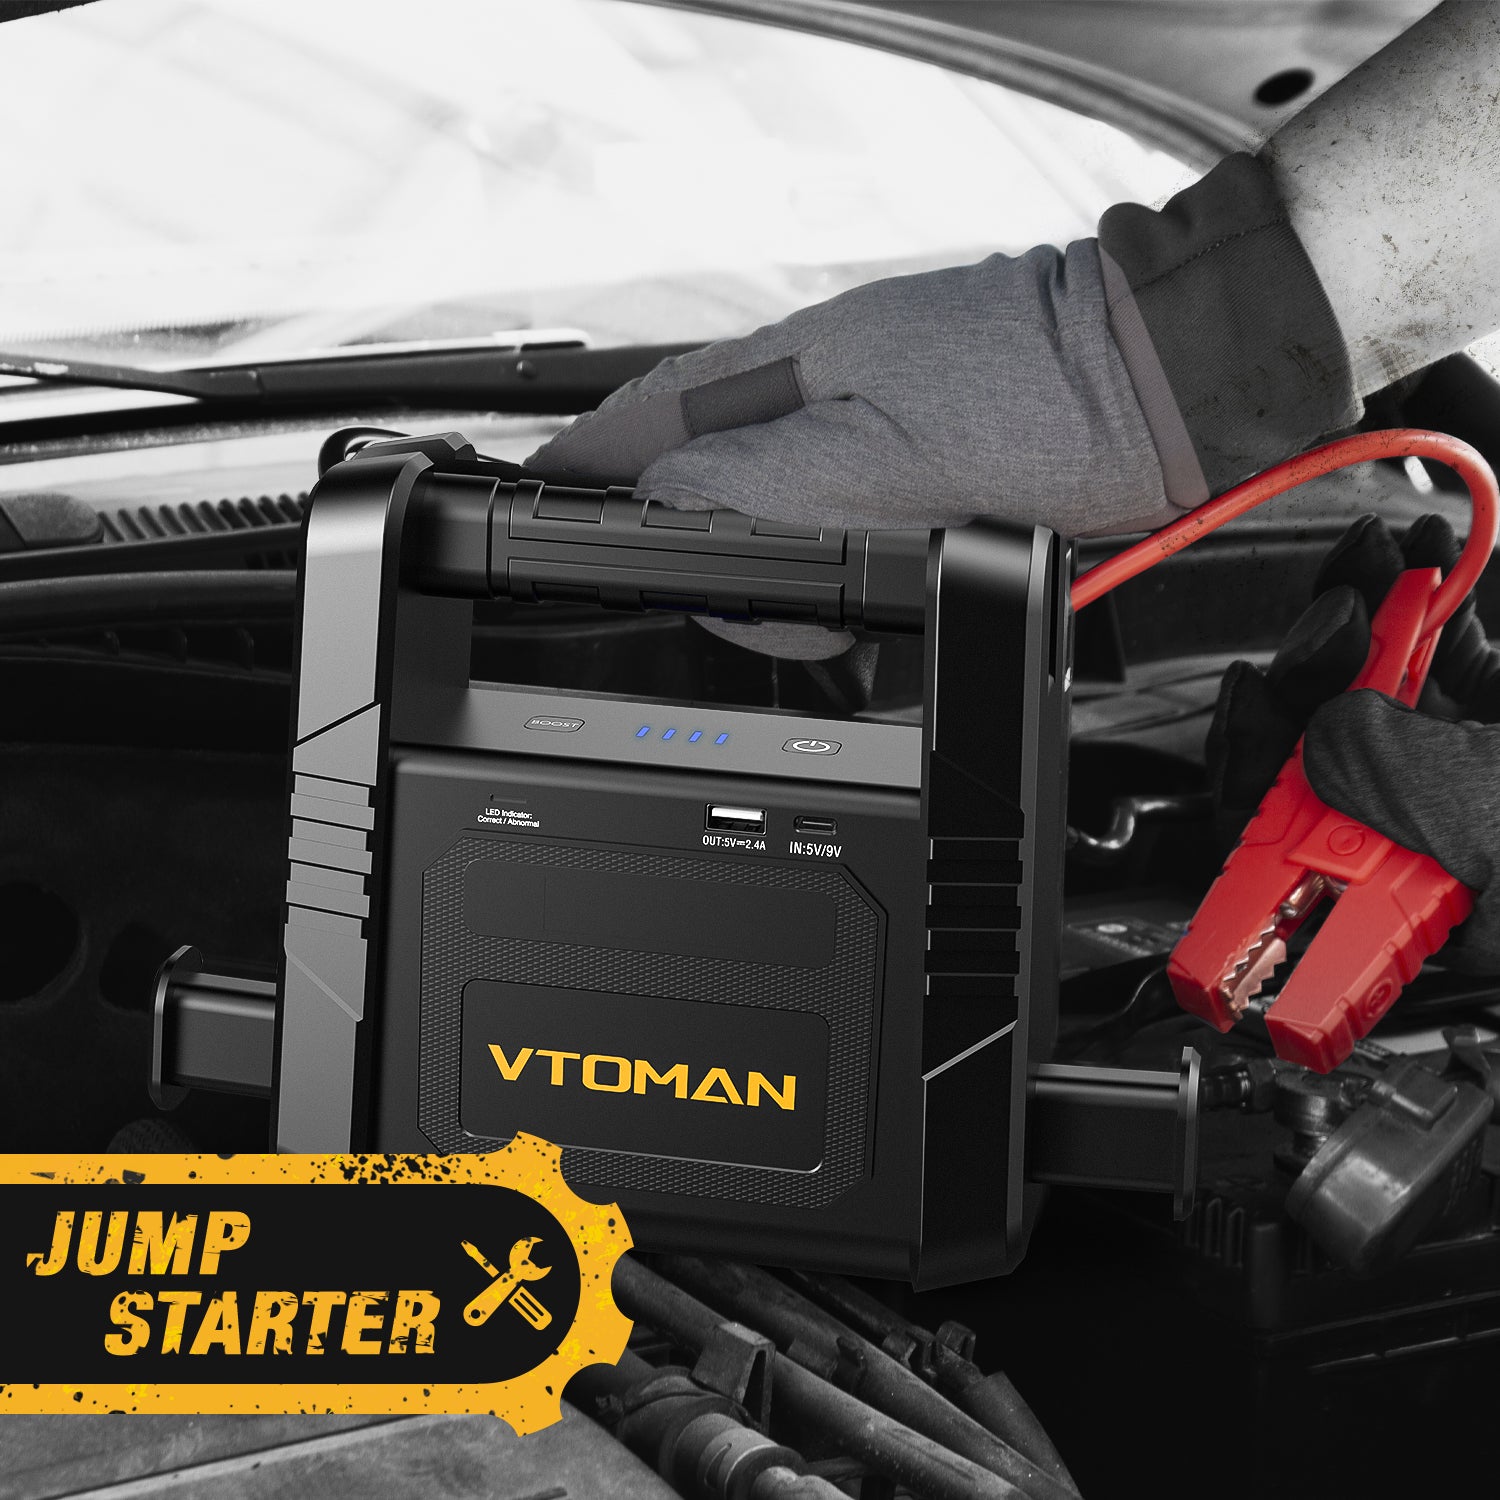 Getit Car Jump Starter, Portable Car Battery Charger Jump Starter, 600a  Peak Auto Jump Box, 12v Power Pack Jumper Start & Phone Charger With Usb  Port